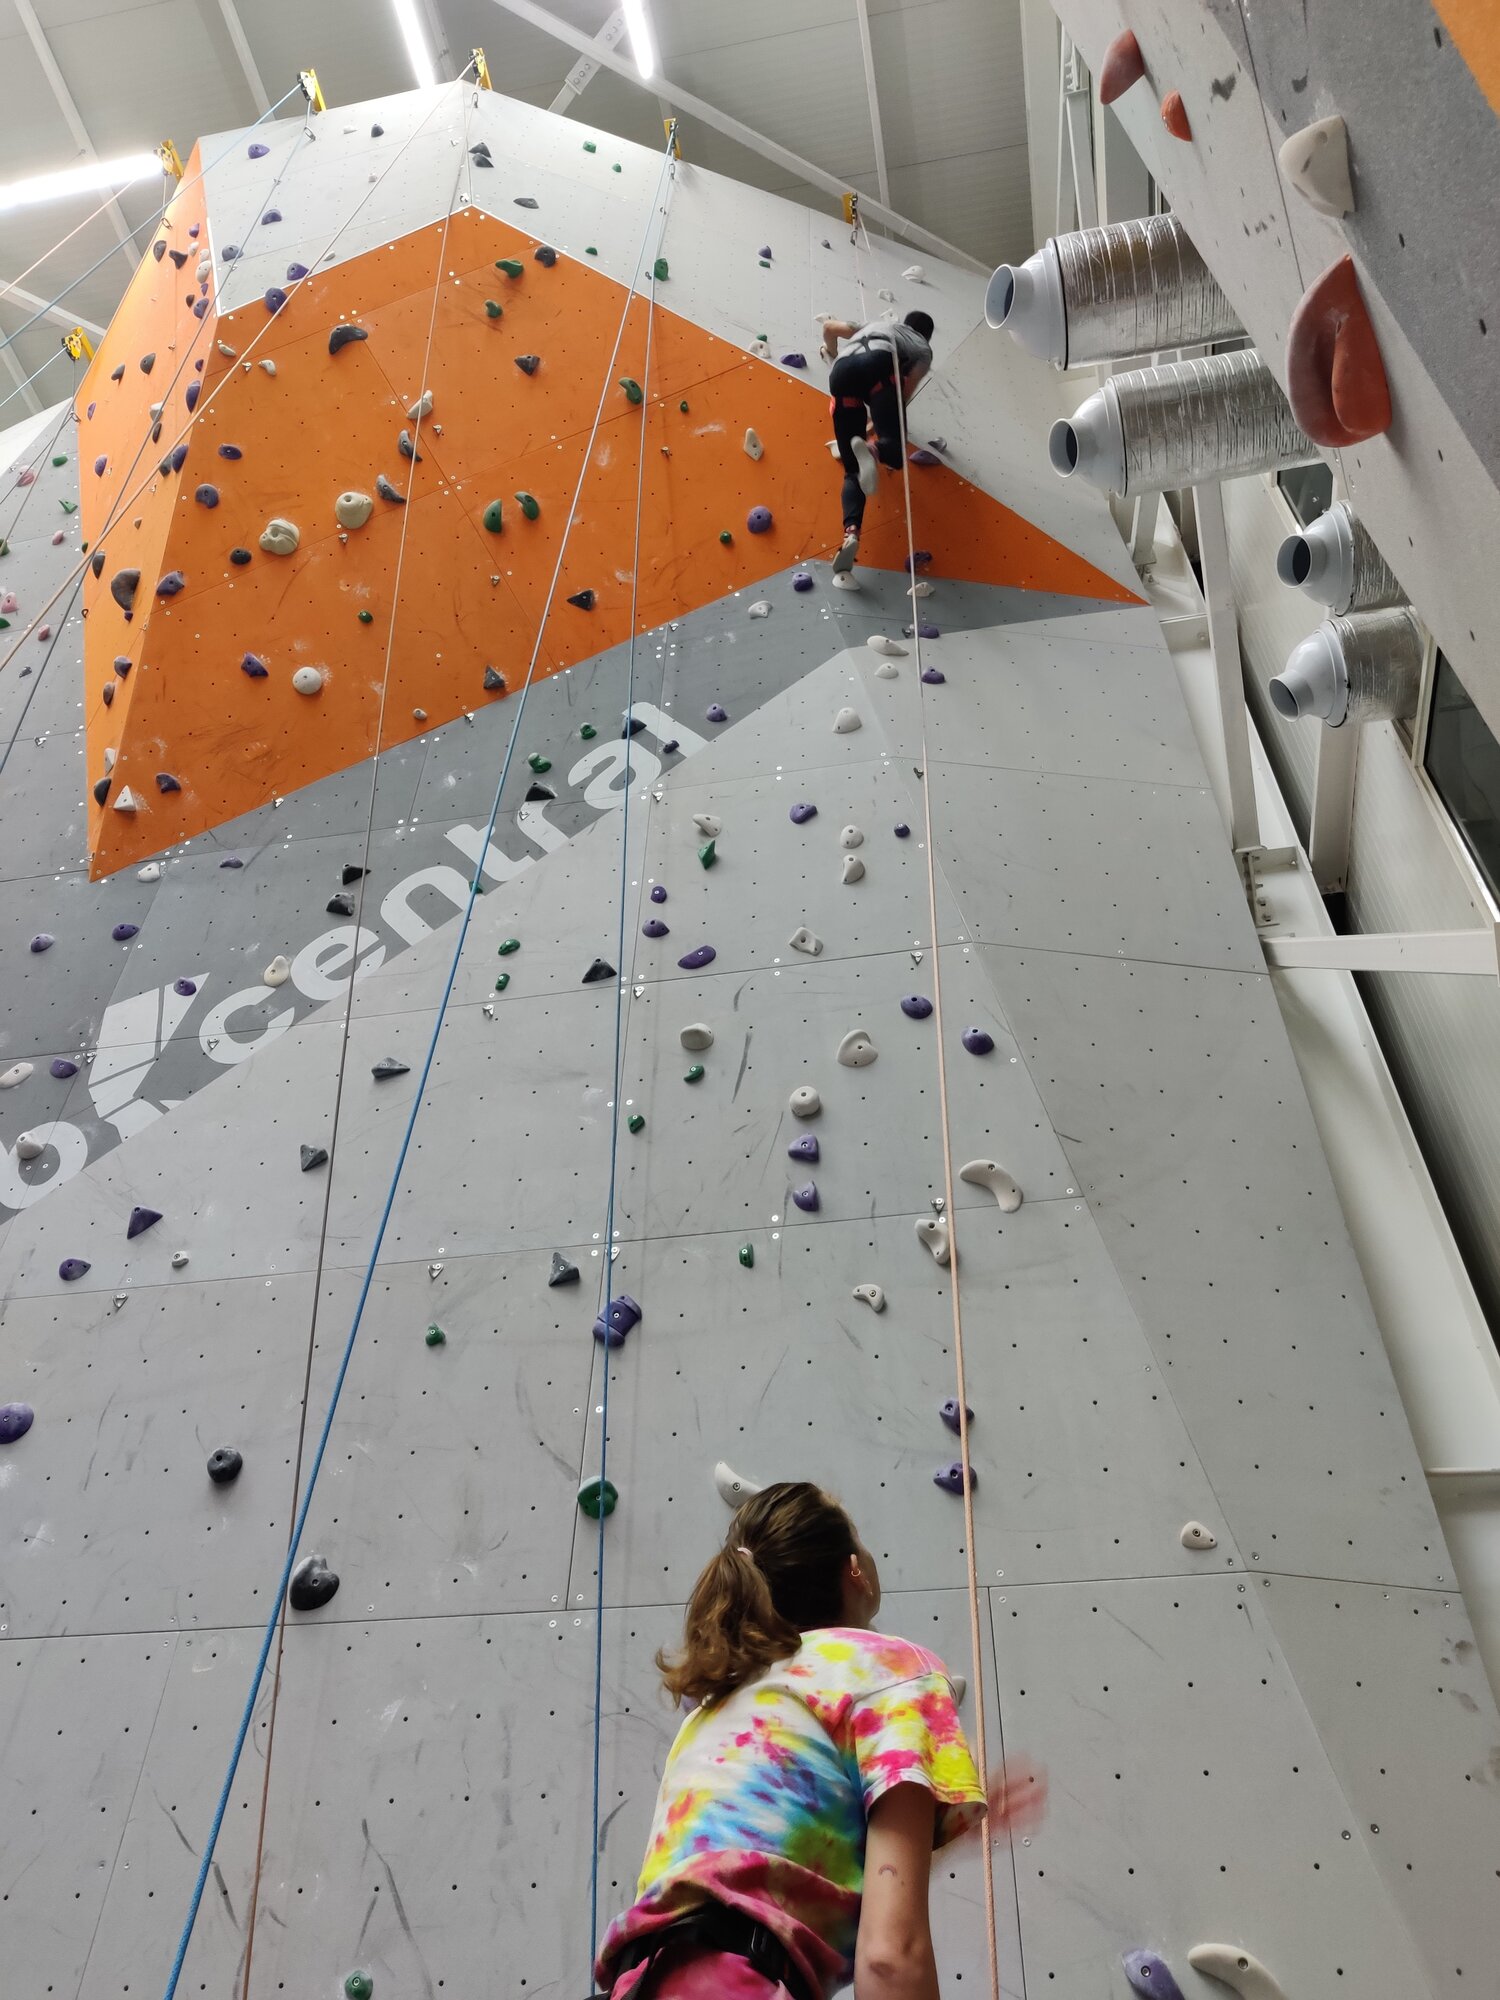 Is rock climbing an extreme sport, adventure activity or simply